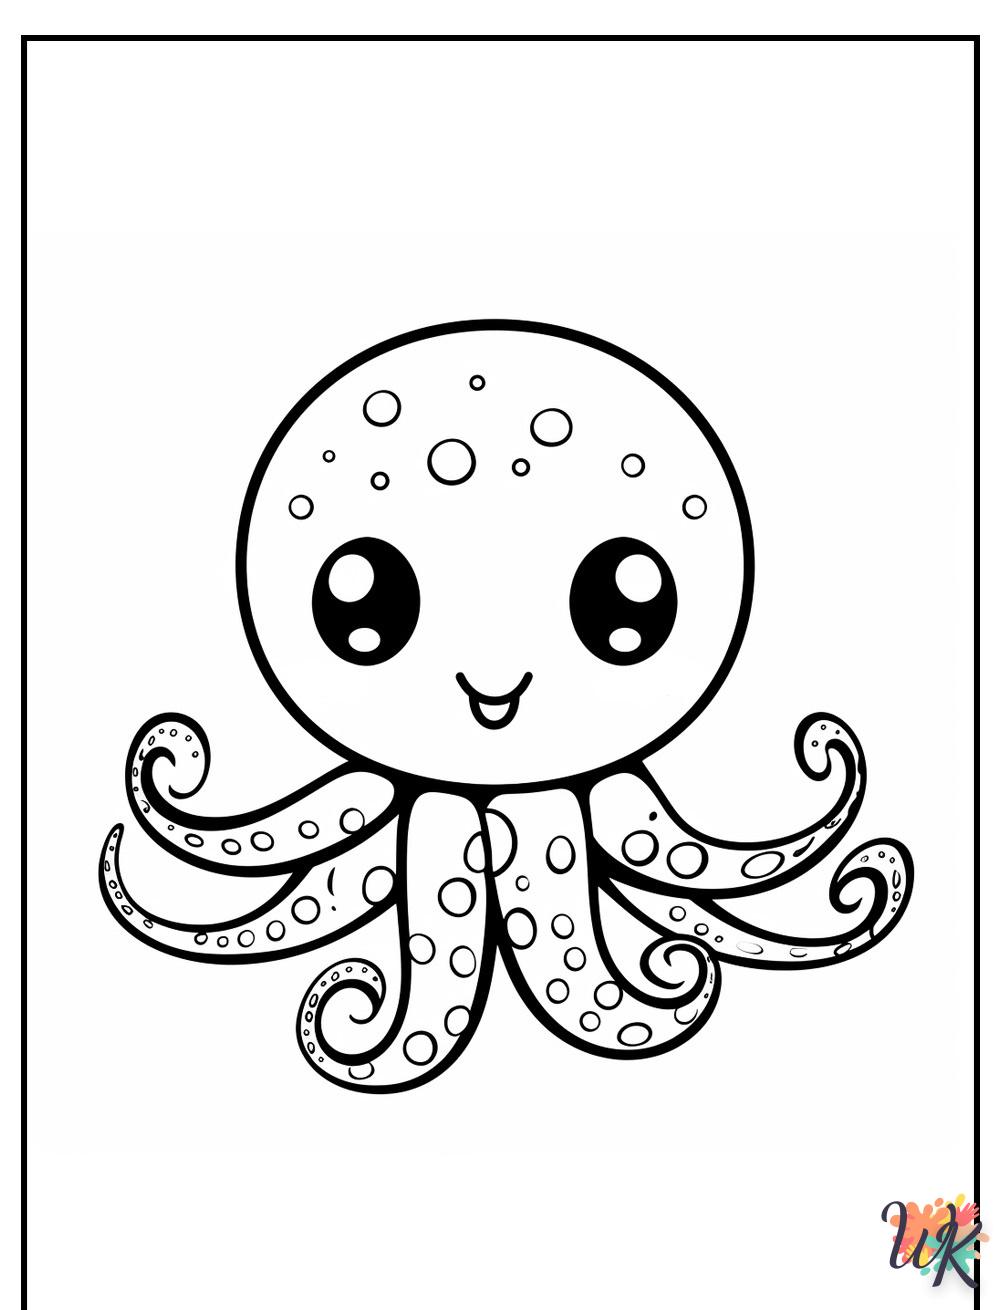 Octopus coloring page for children to print